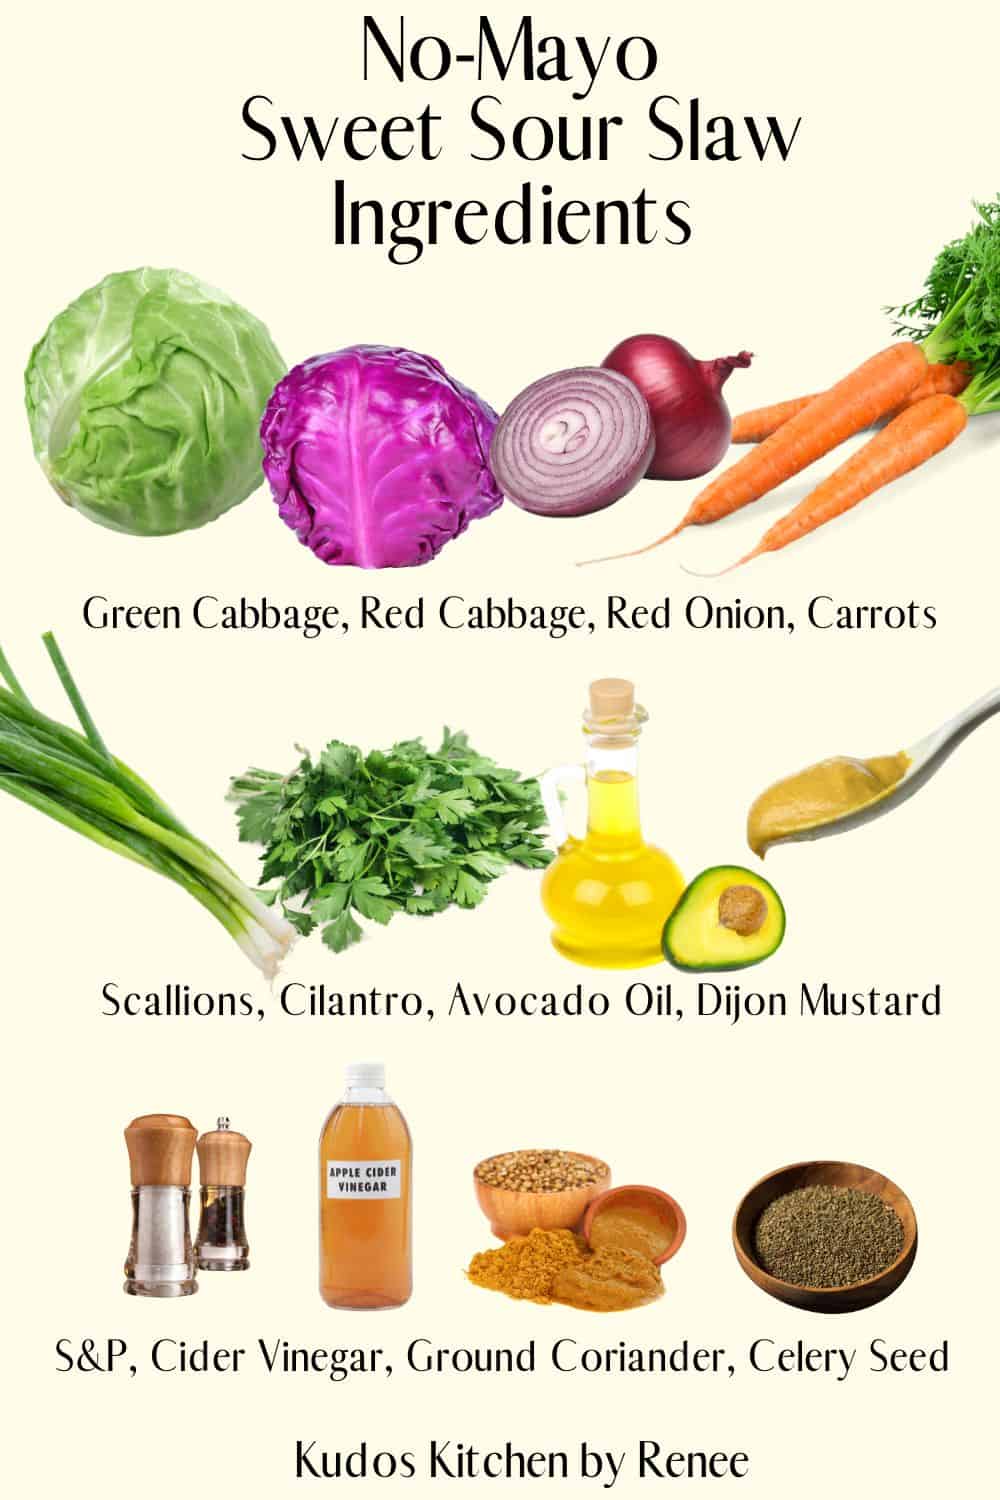 A visual ingredient list for making the recipe of No Mayo Sweet Sour Coleslaw.